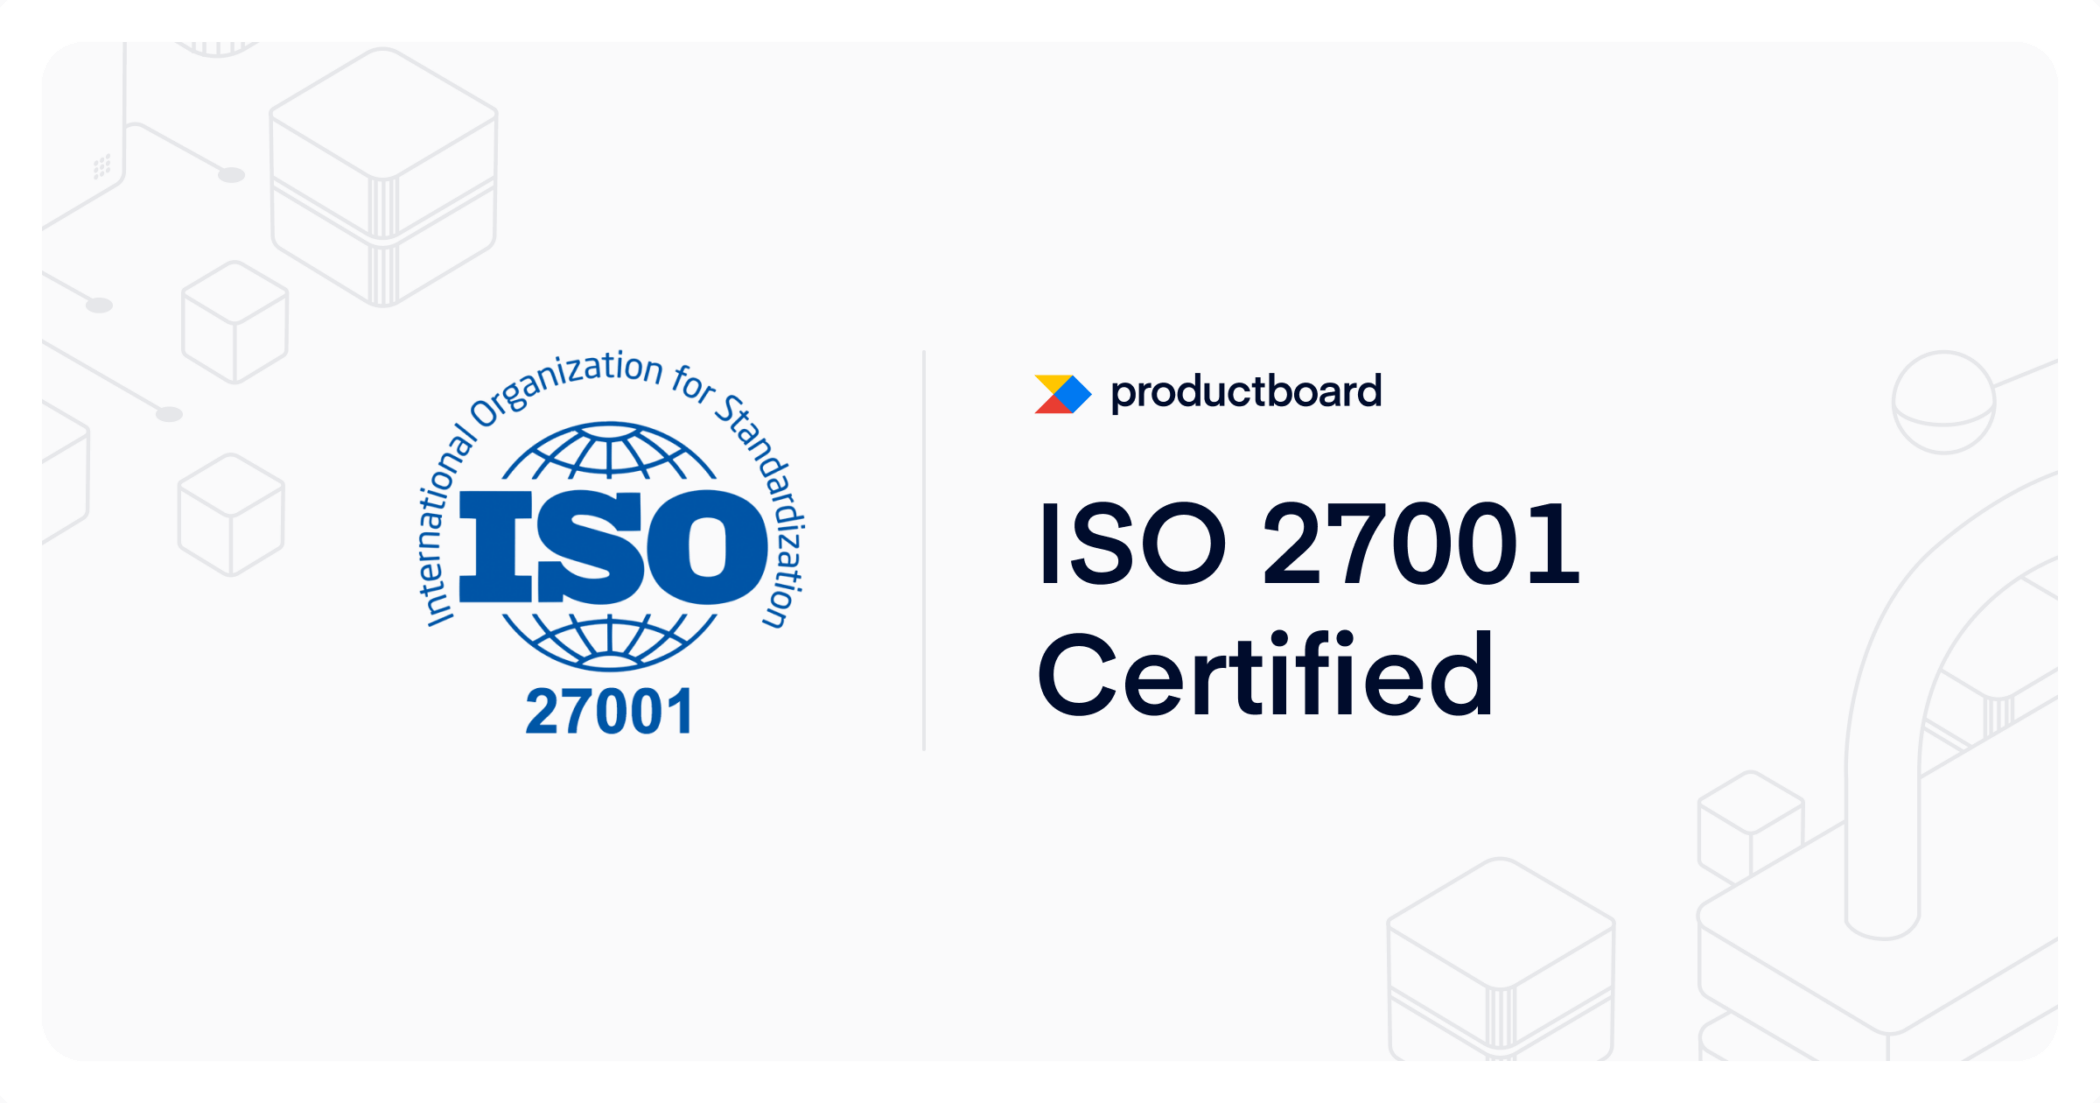 Productboard Is Now ISO 27001 Certified